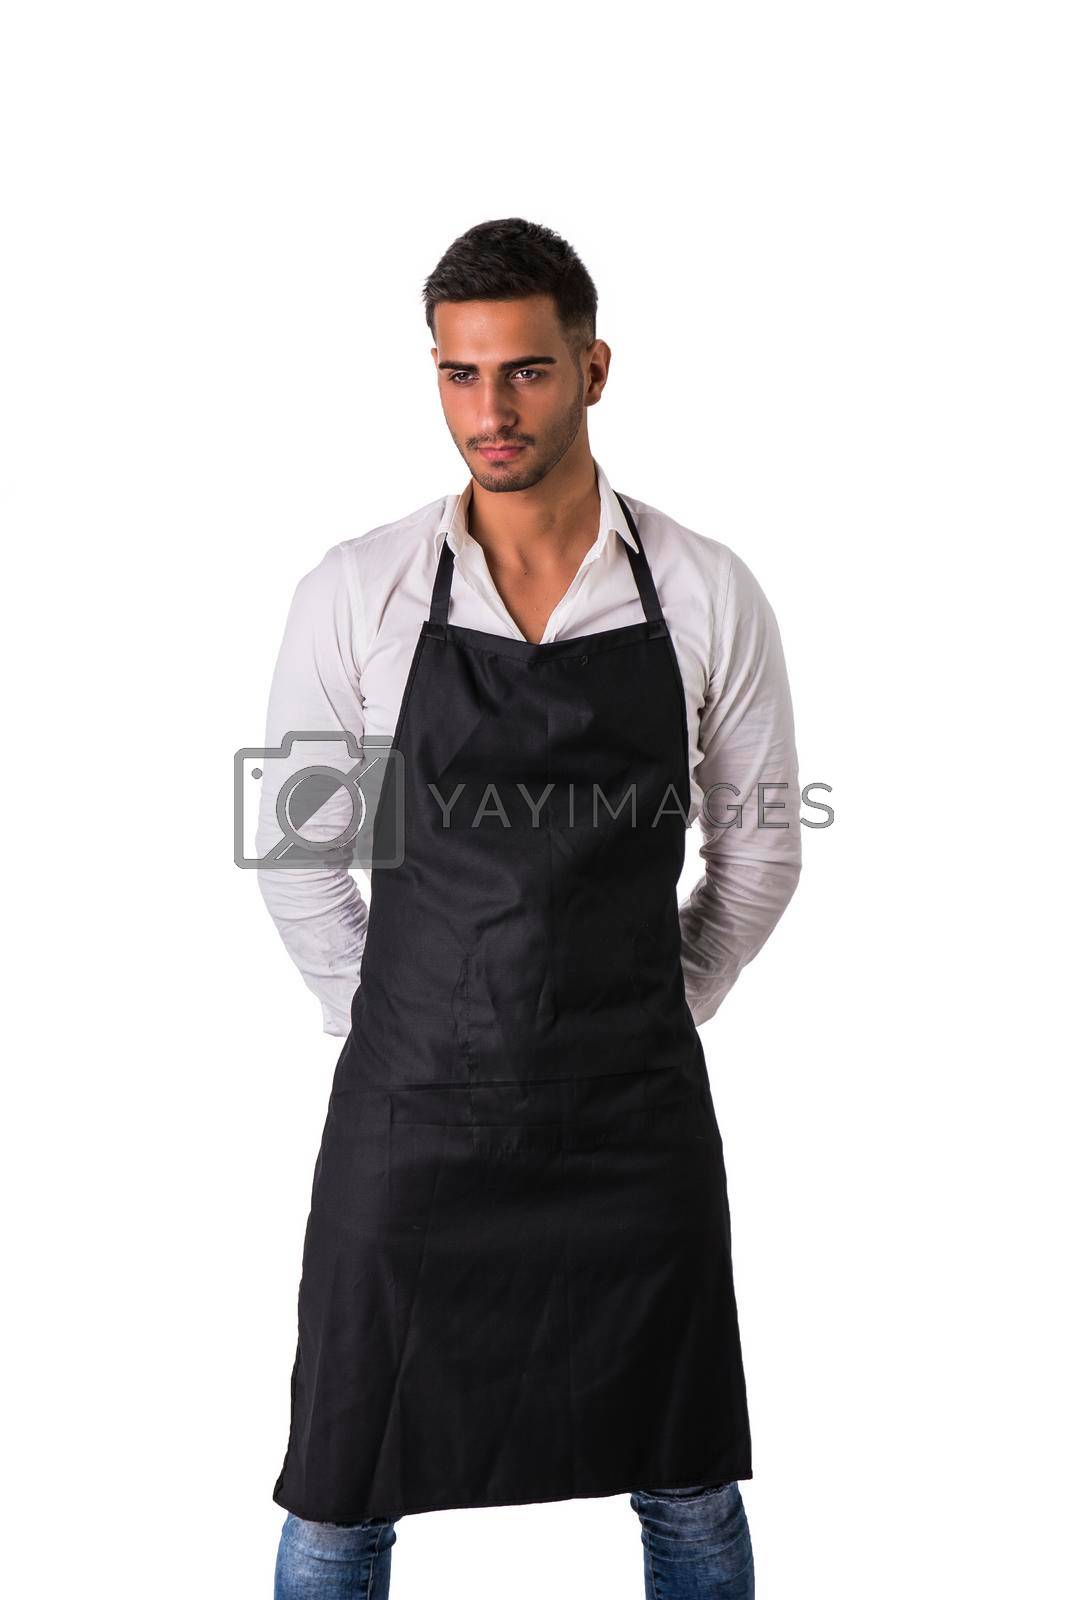 Royalty free image of Young chef or waiter wearing black apron by artofphoto